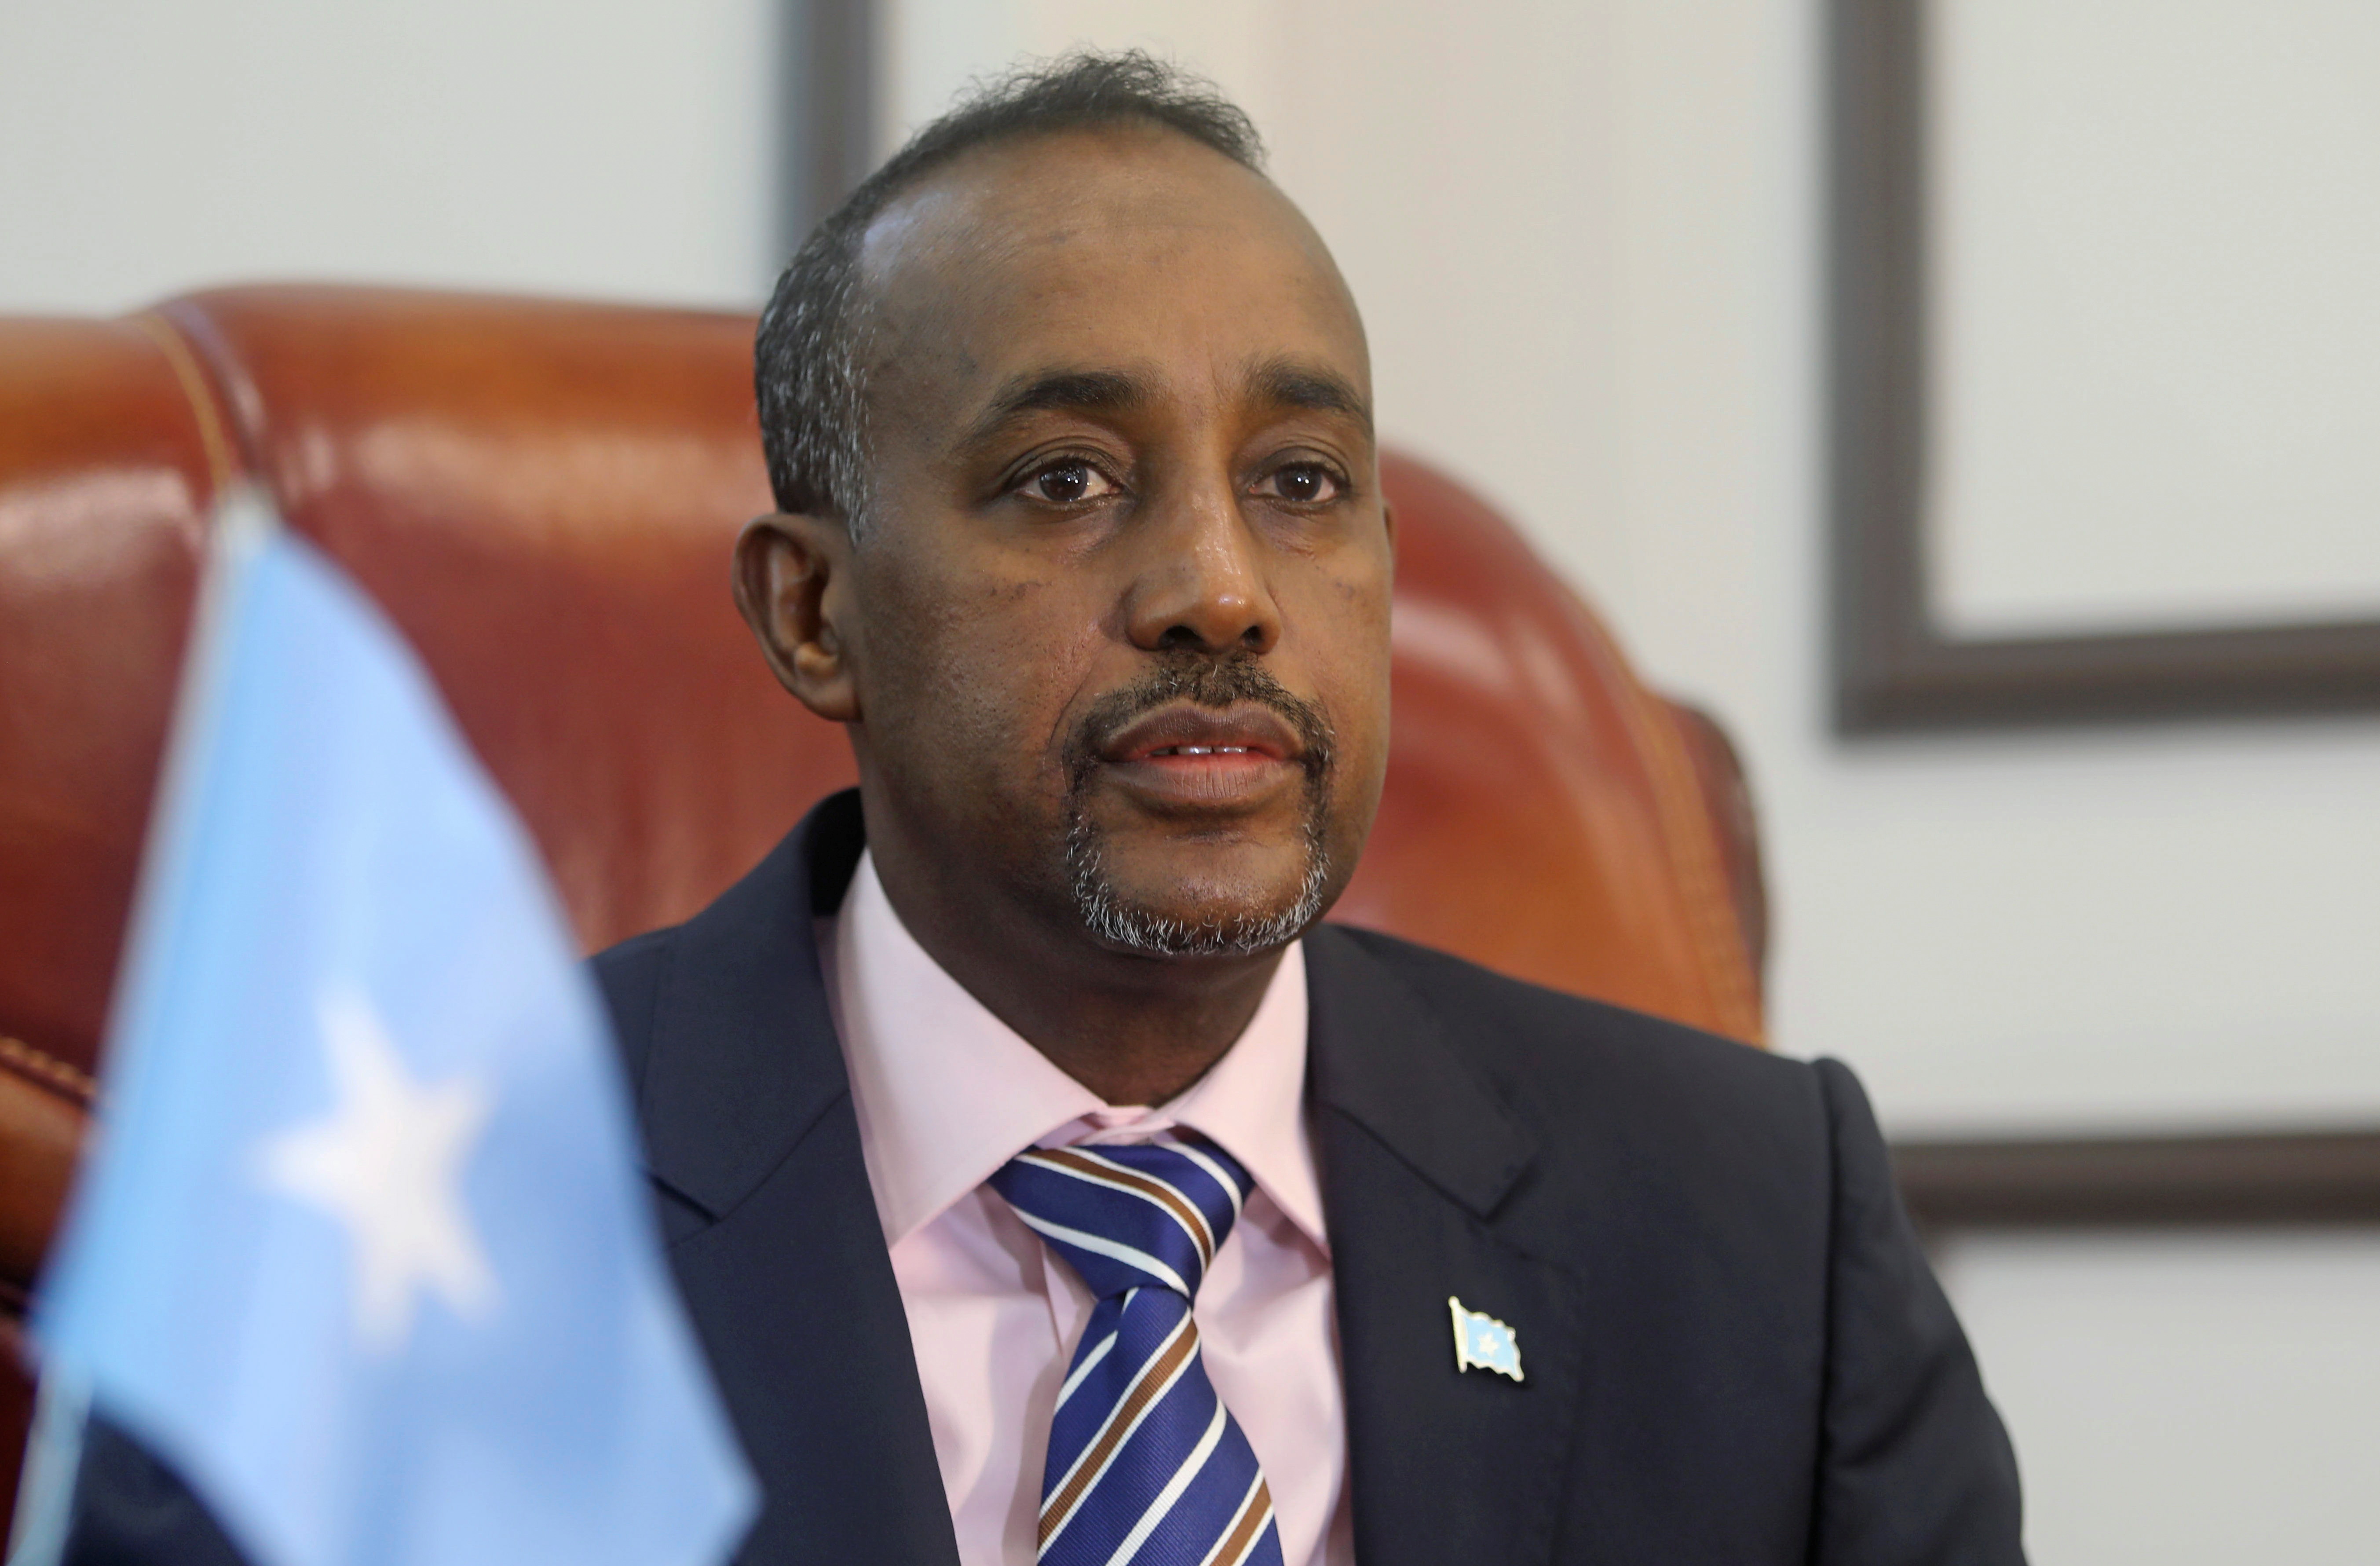 Somalia's PM Mohamed Hussein Roble looks on before addressing members of parliament, in Mogadishu